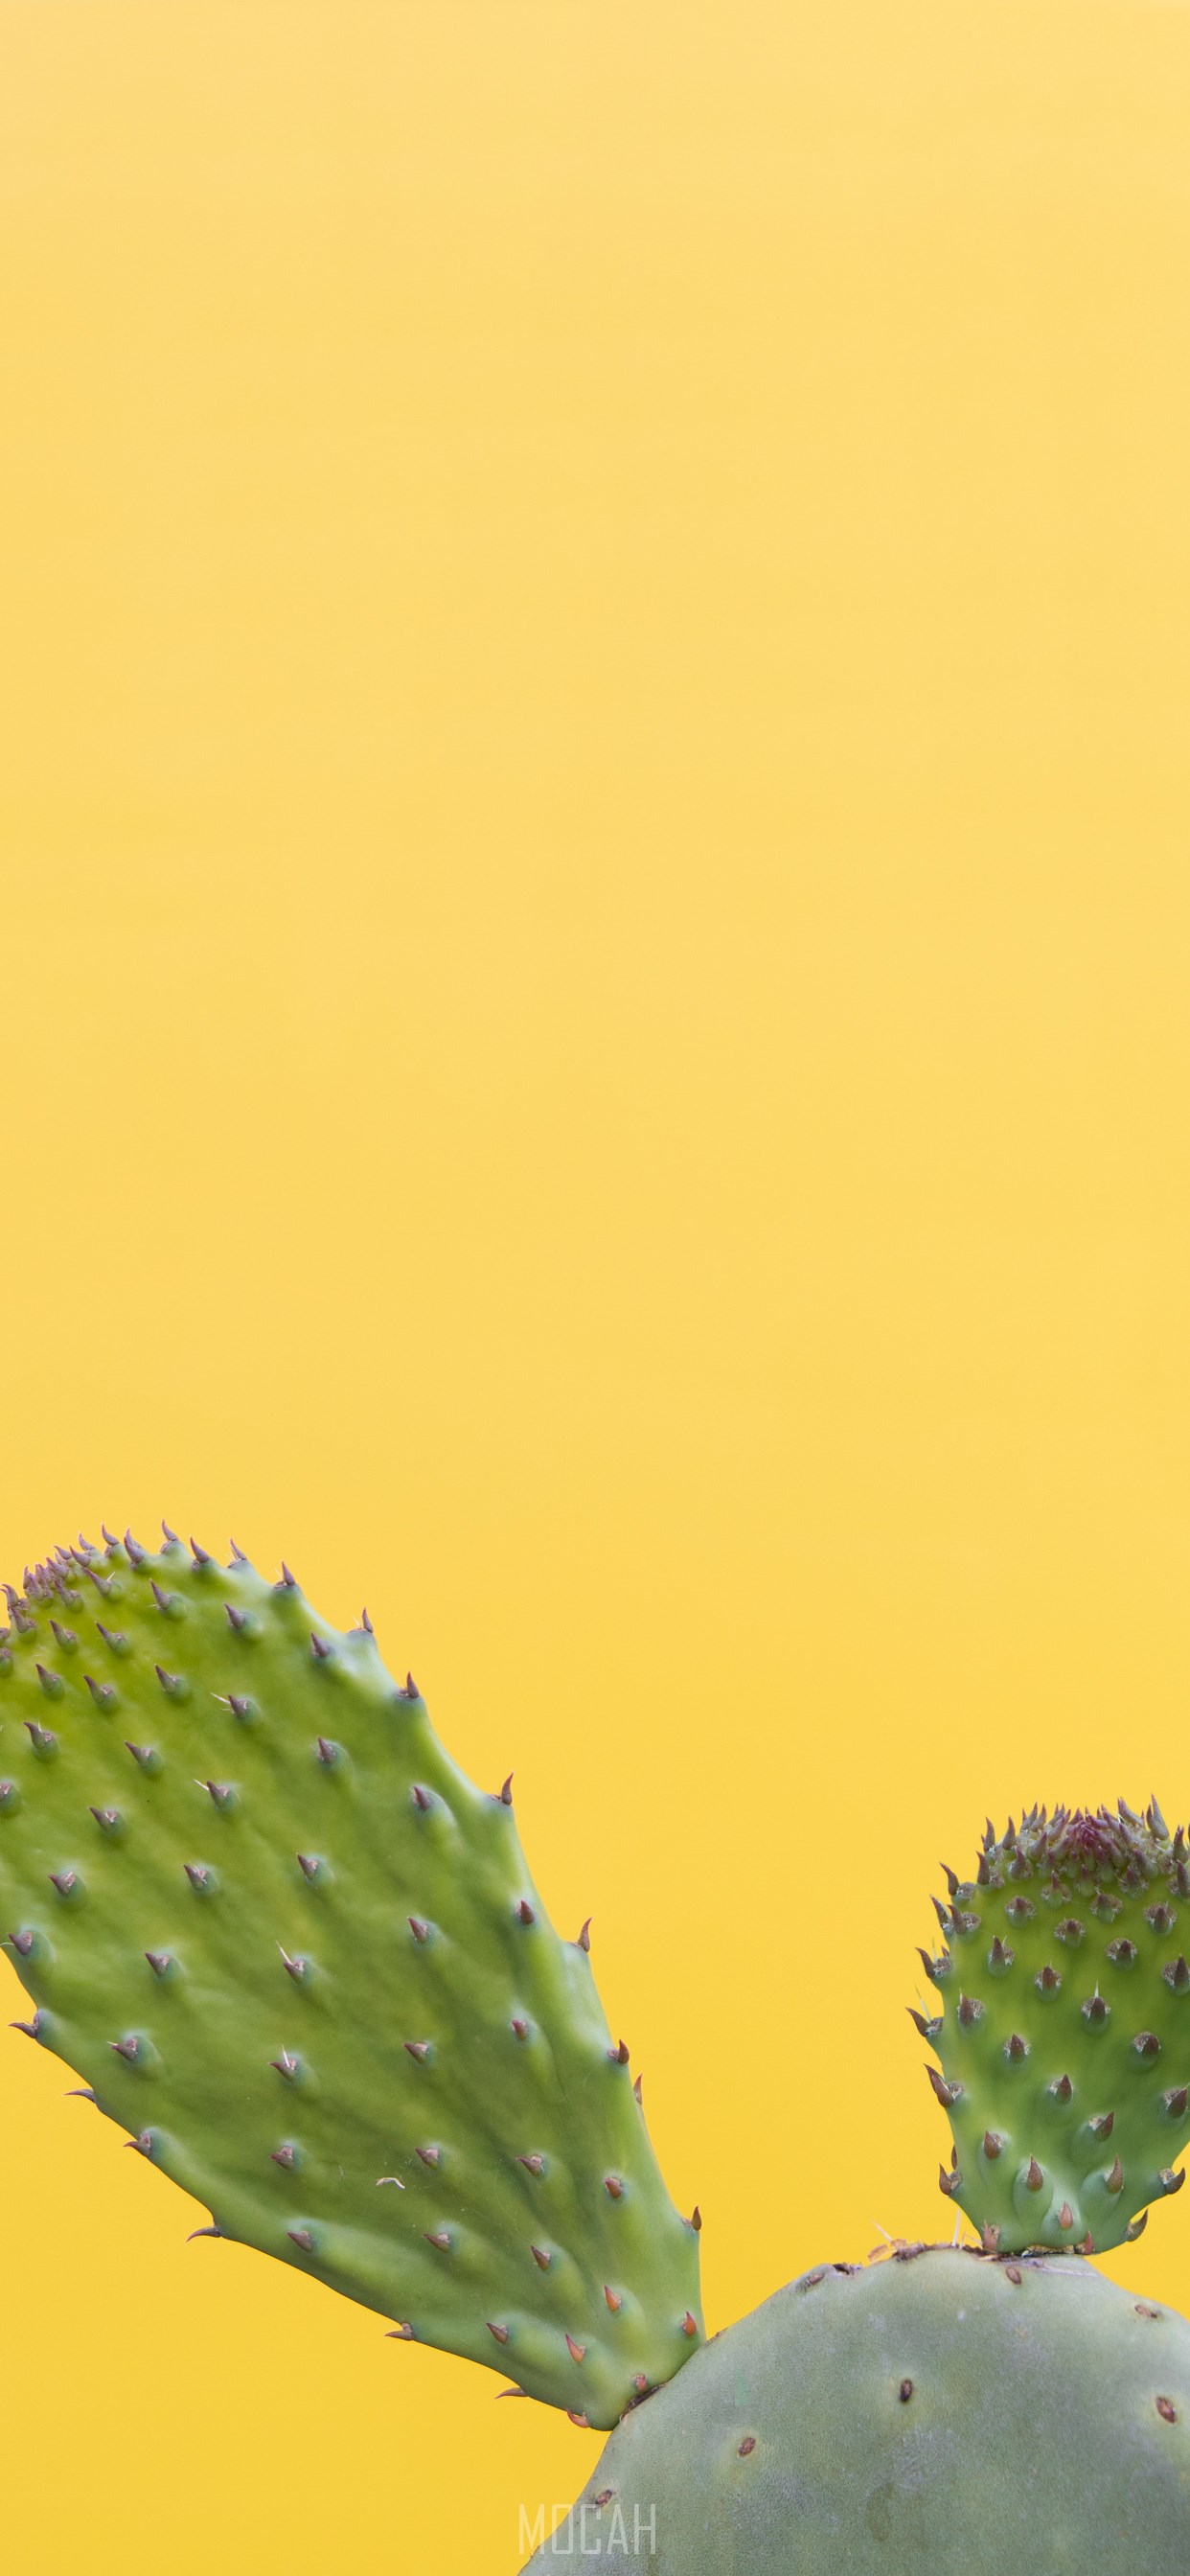 Cactus, Plants, Green, Plant, Prickly Pear, Apple iPhone 11 Pro Max background hd, 1242x2688 Gallery HD Wallpaper